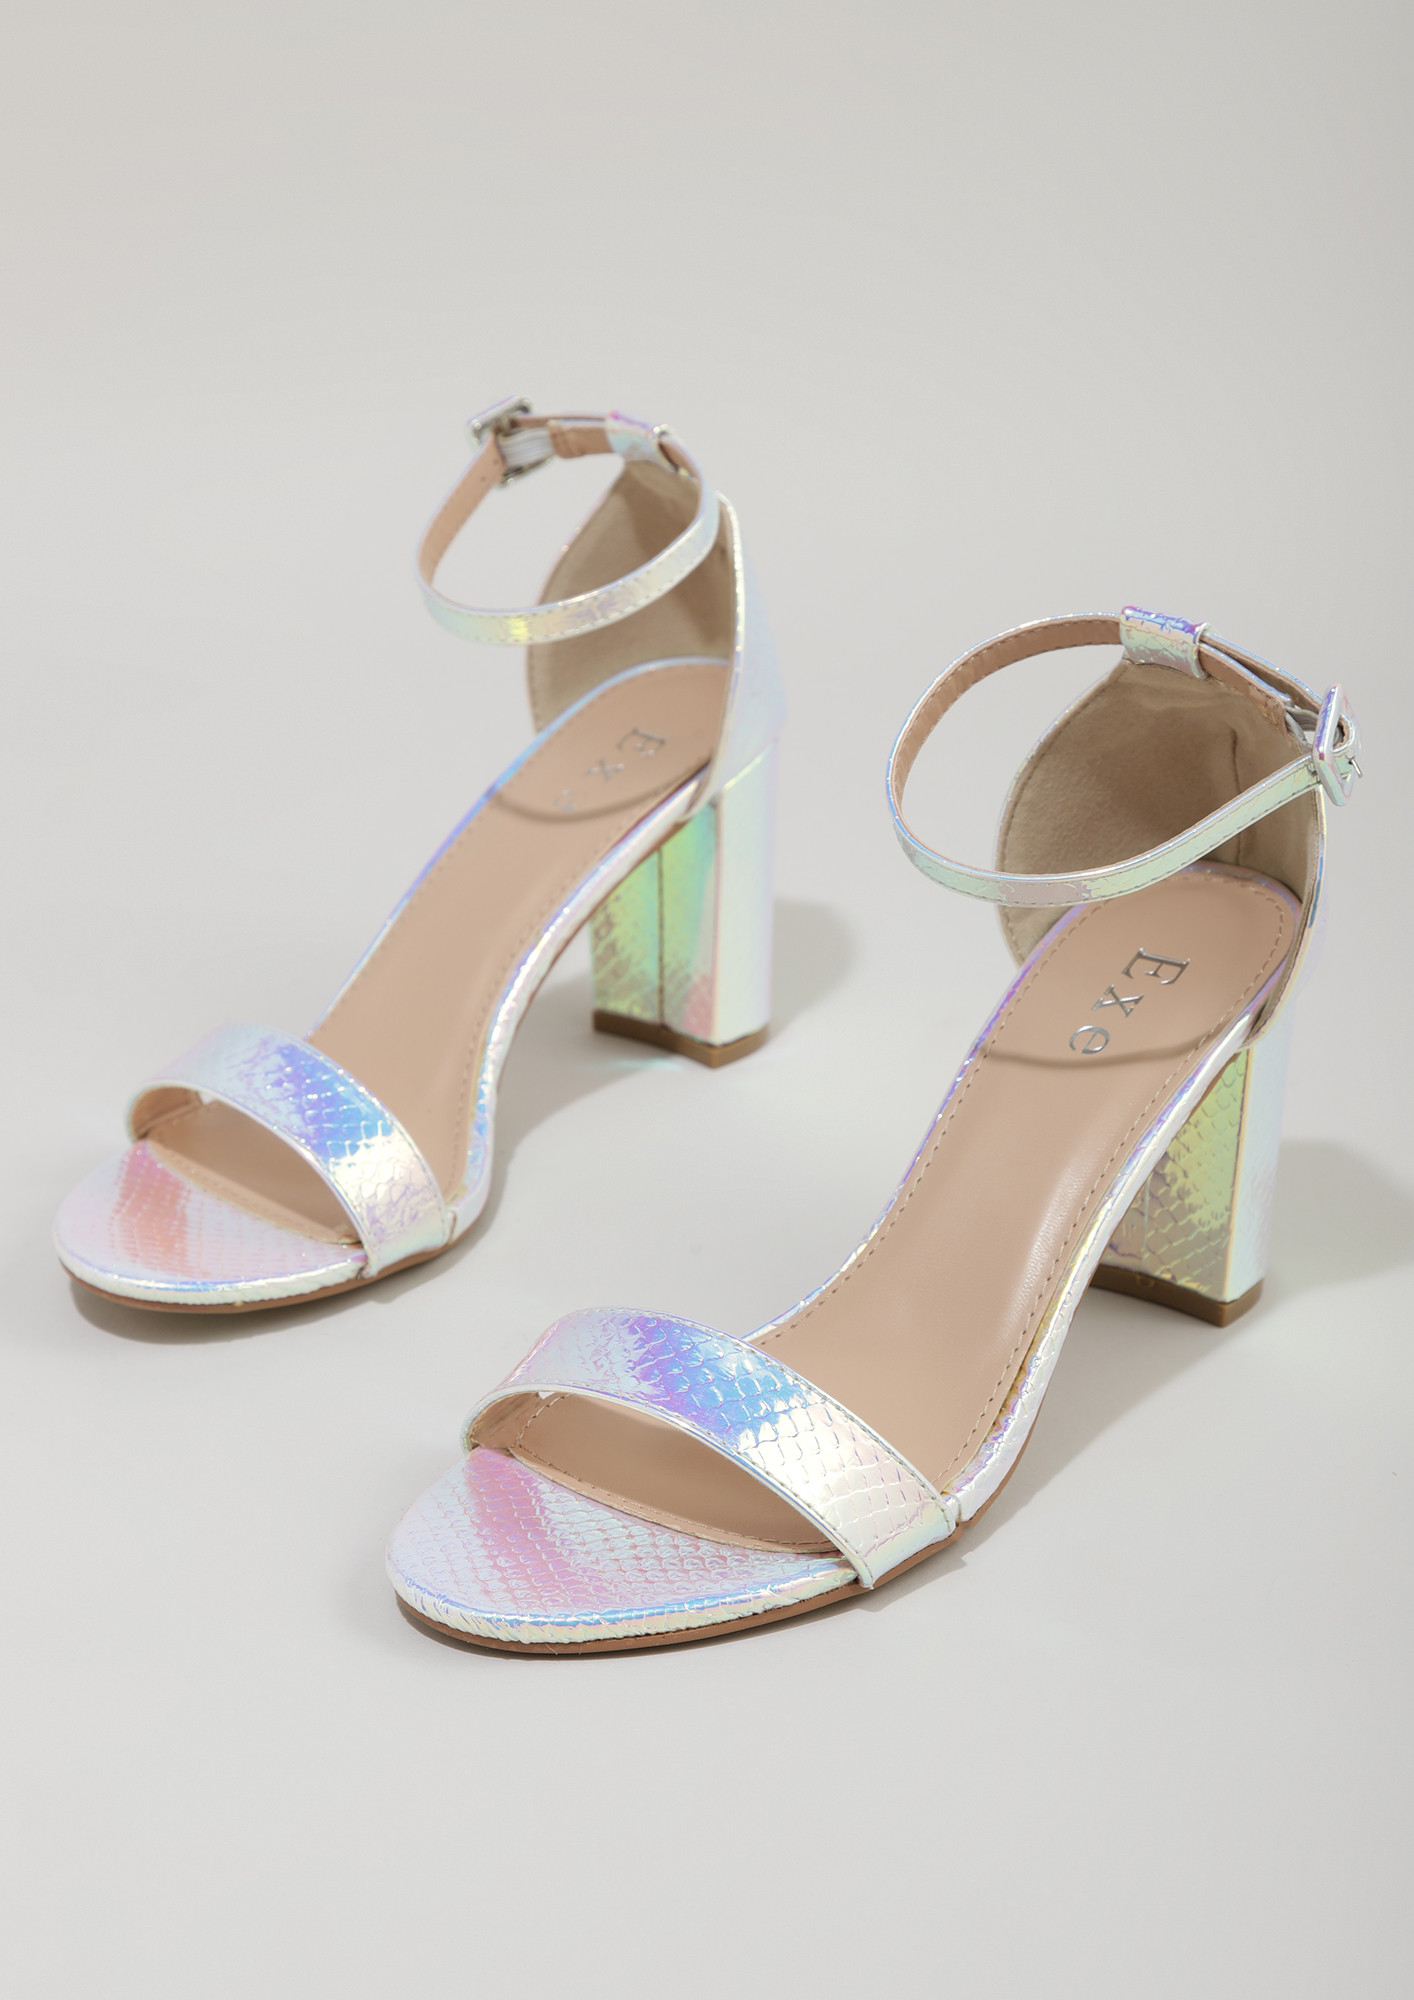 HOLOGRAPHIC SILVER SANDALS